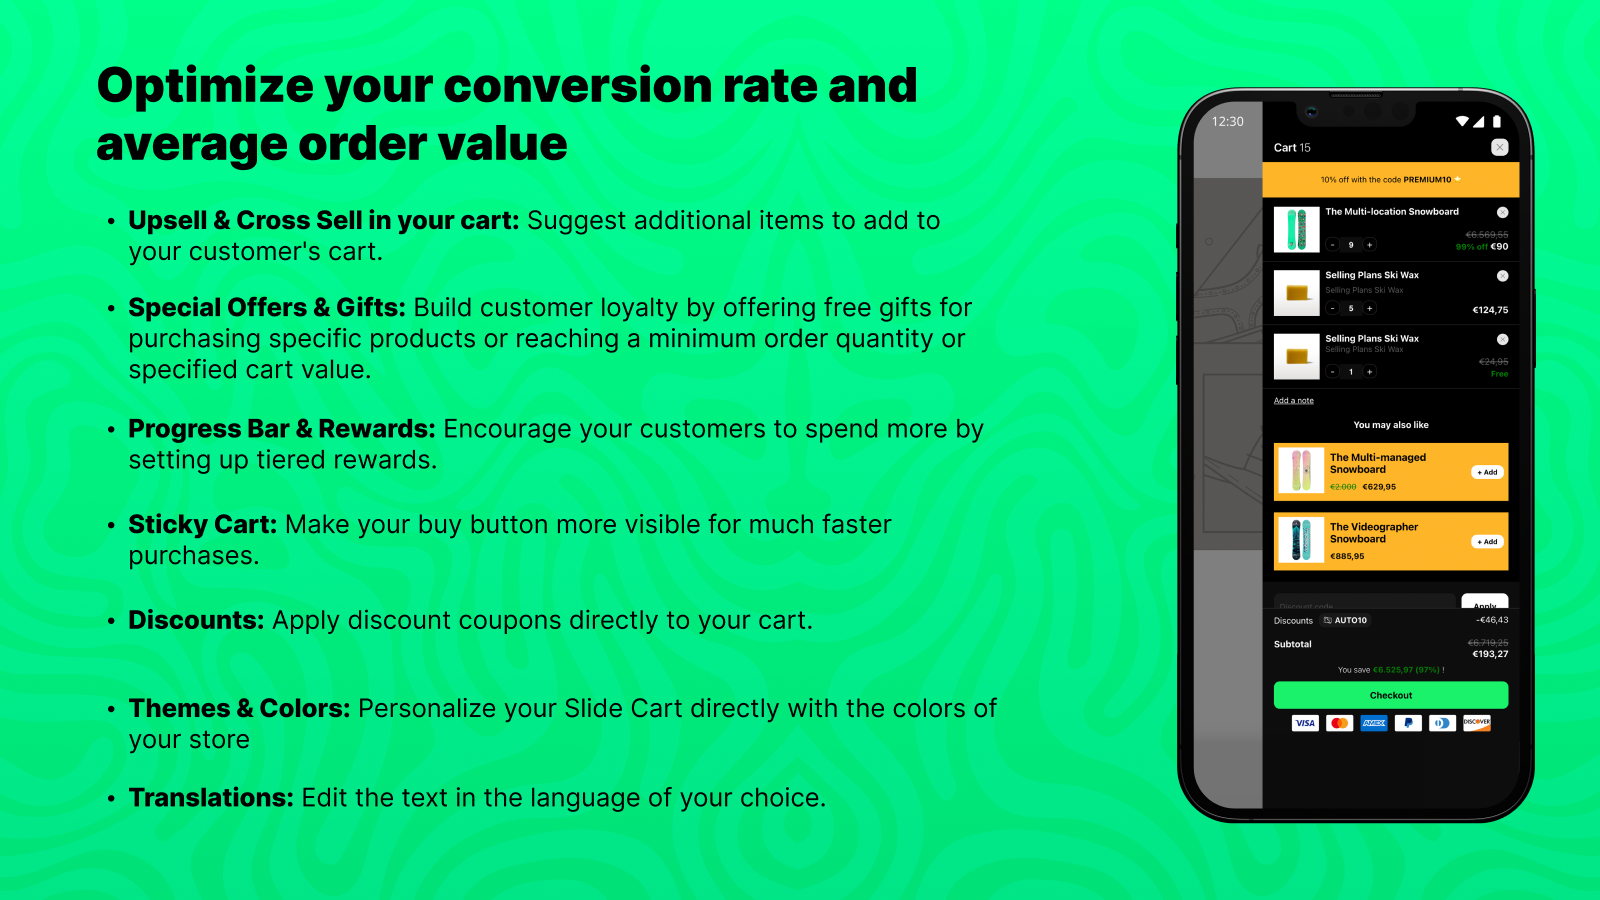 Optimize your conversion rate and average order value